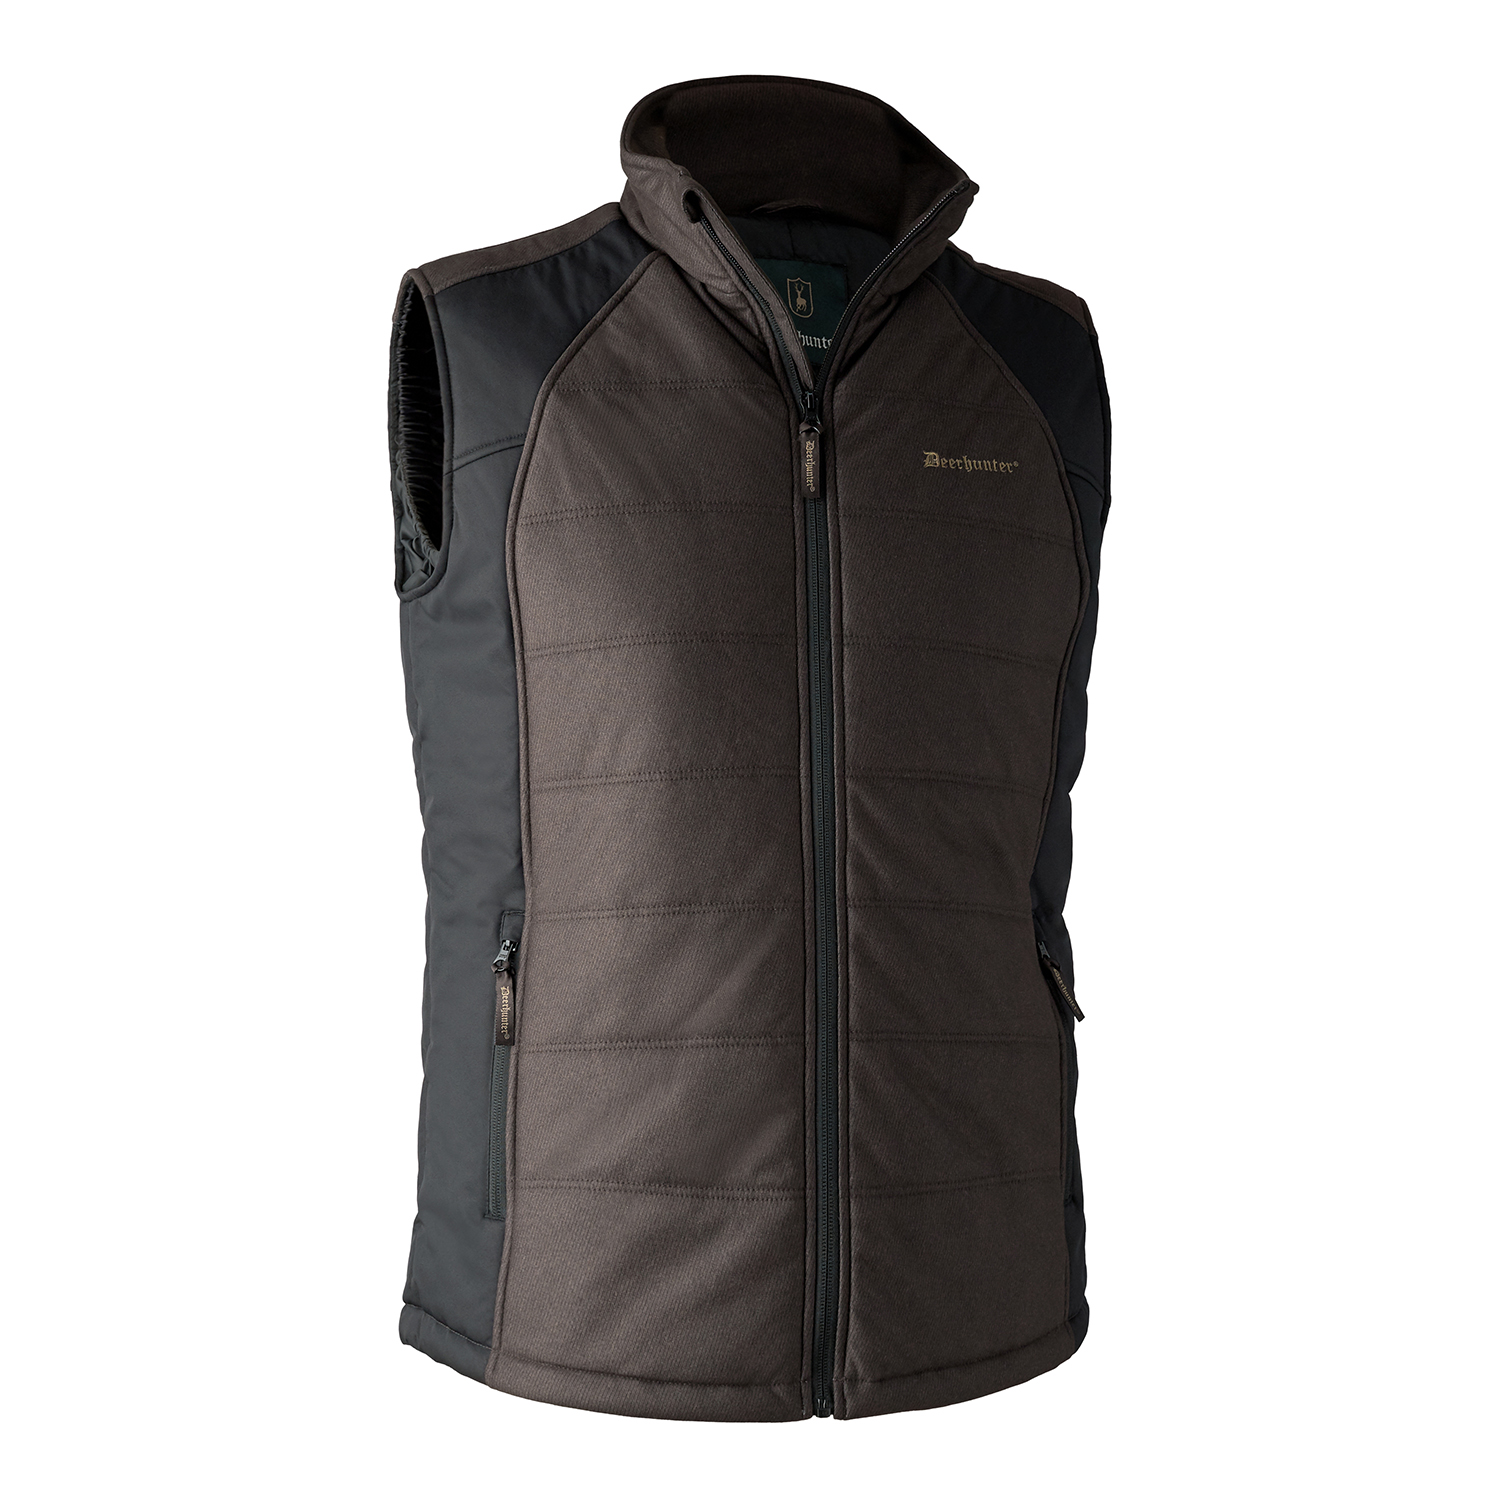 Moss Padded Vest - Brown Leaf - XL thumbnail